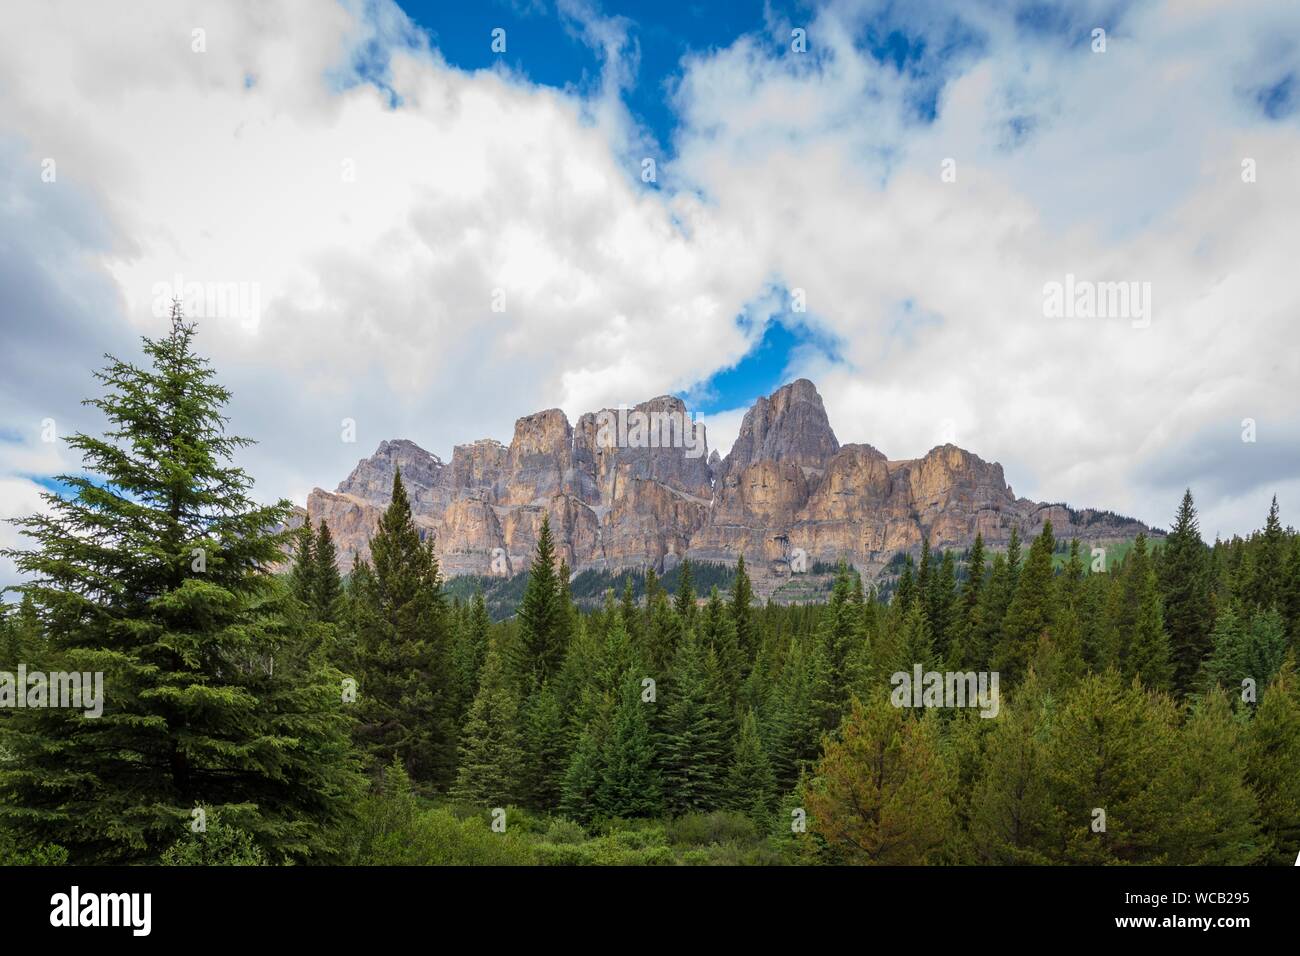 Castle Mountain in Banff National Park, Canada on a partly cloudy day. Stock Photo